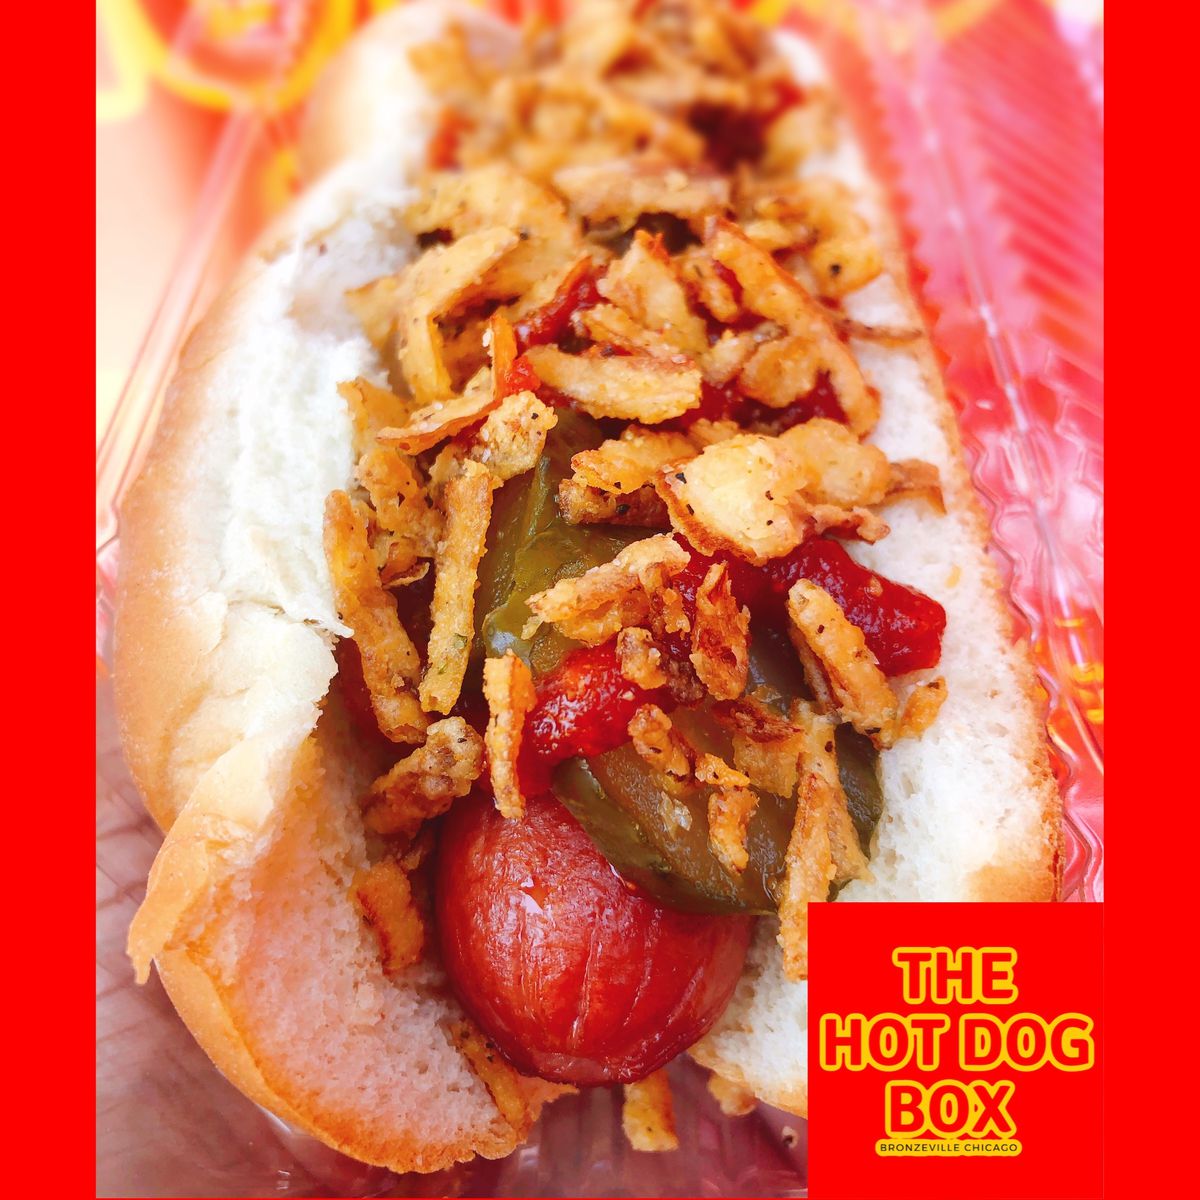 A hot dog with lots of toppings